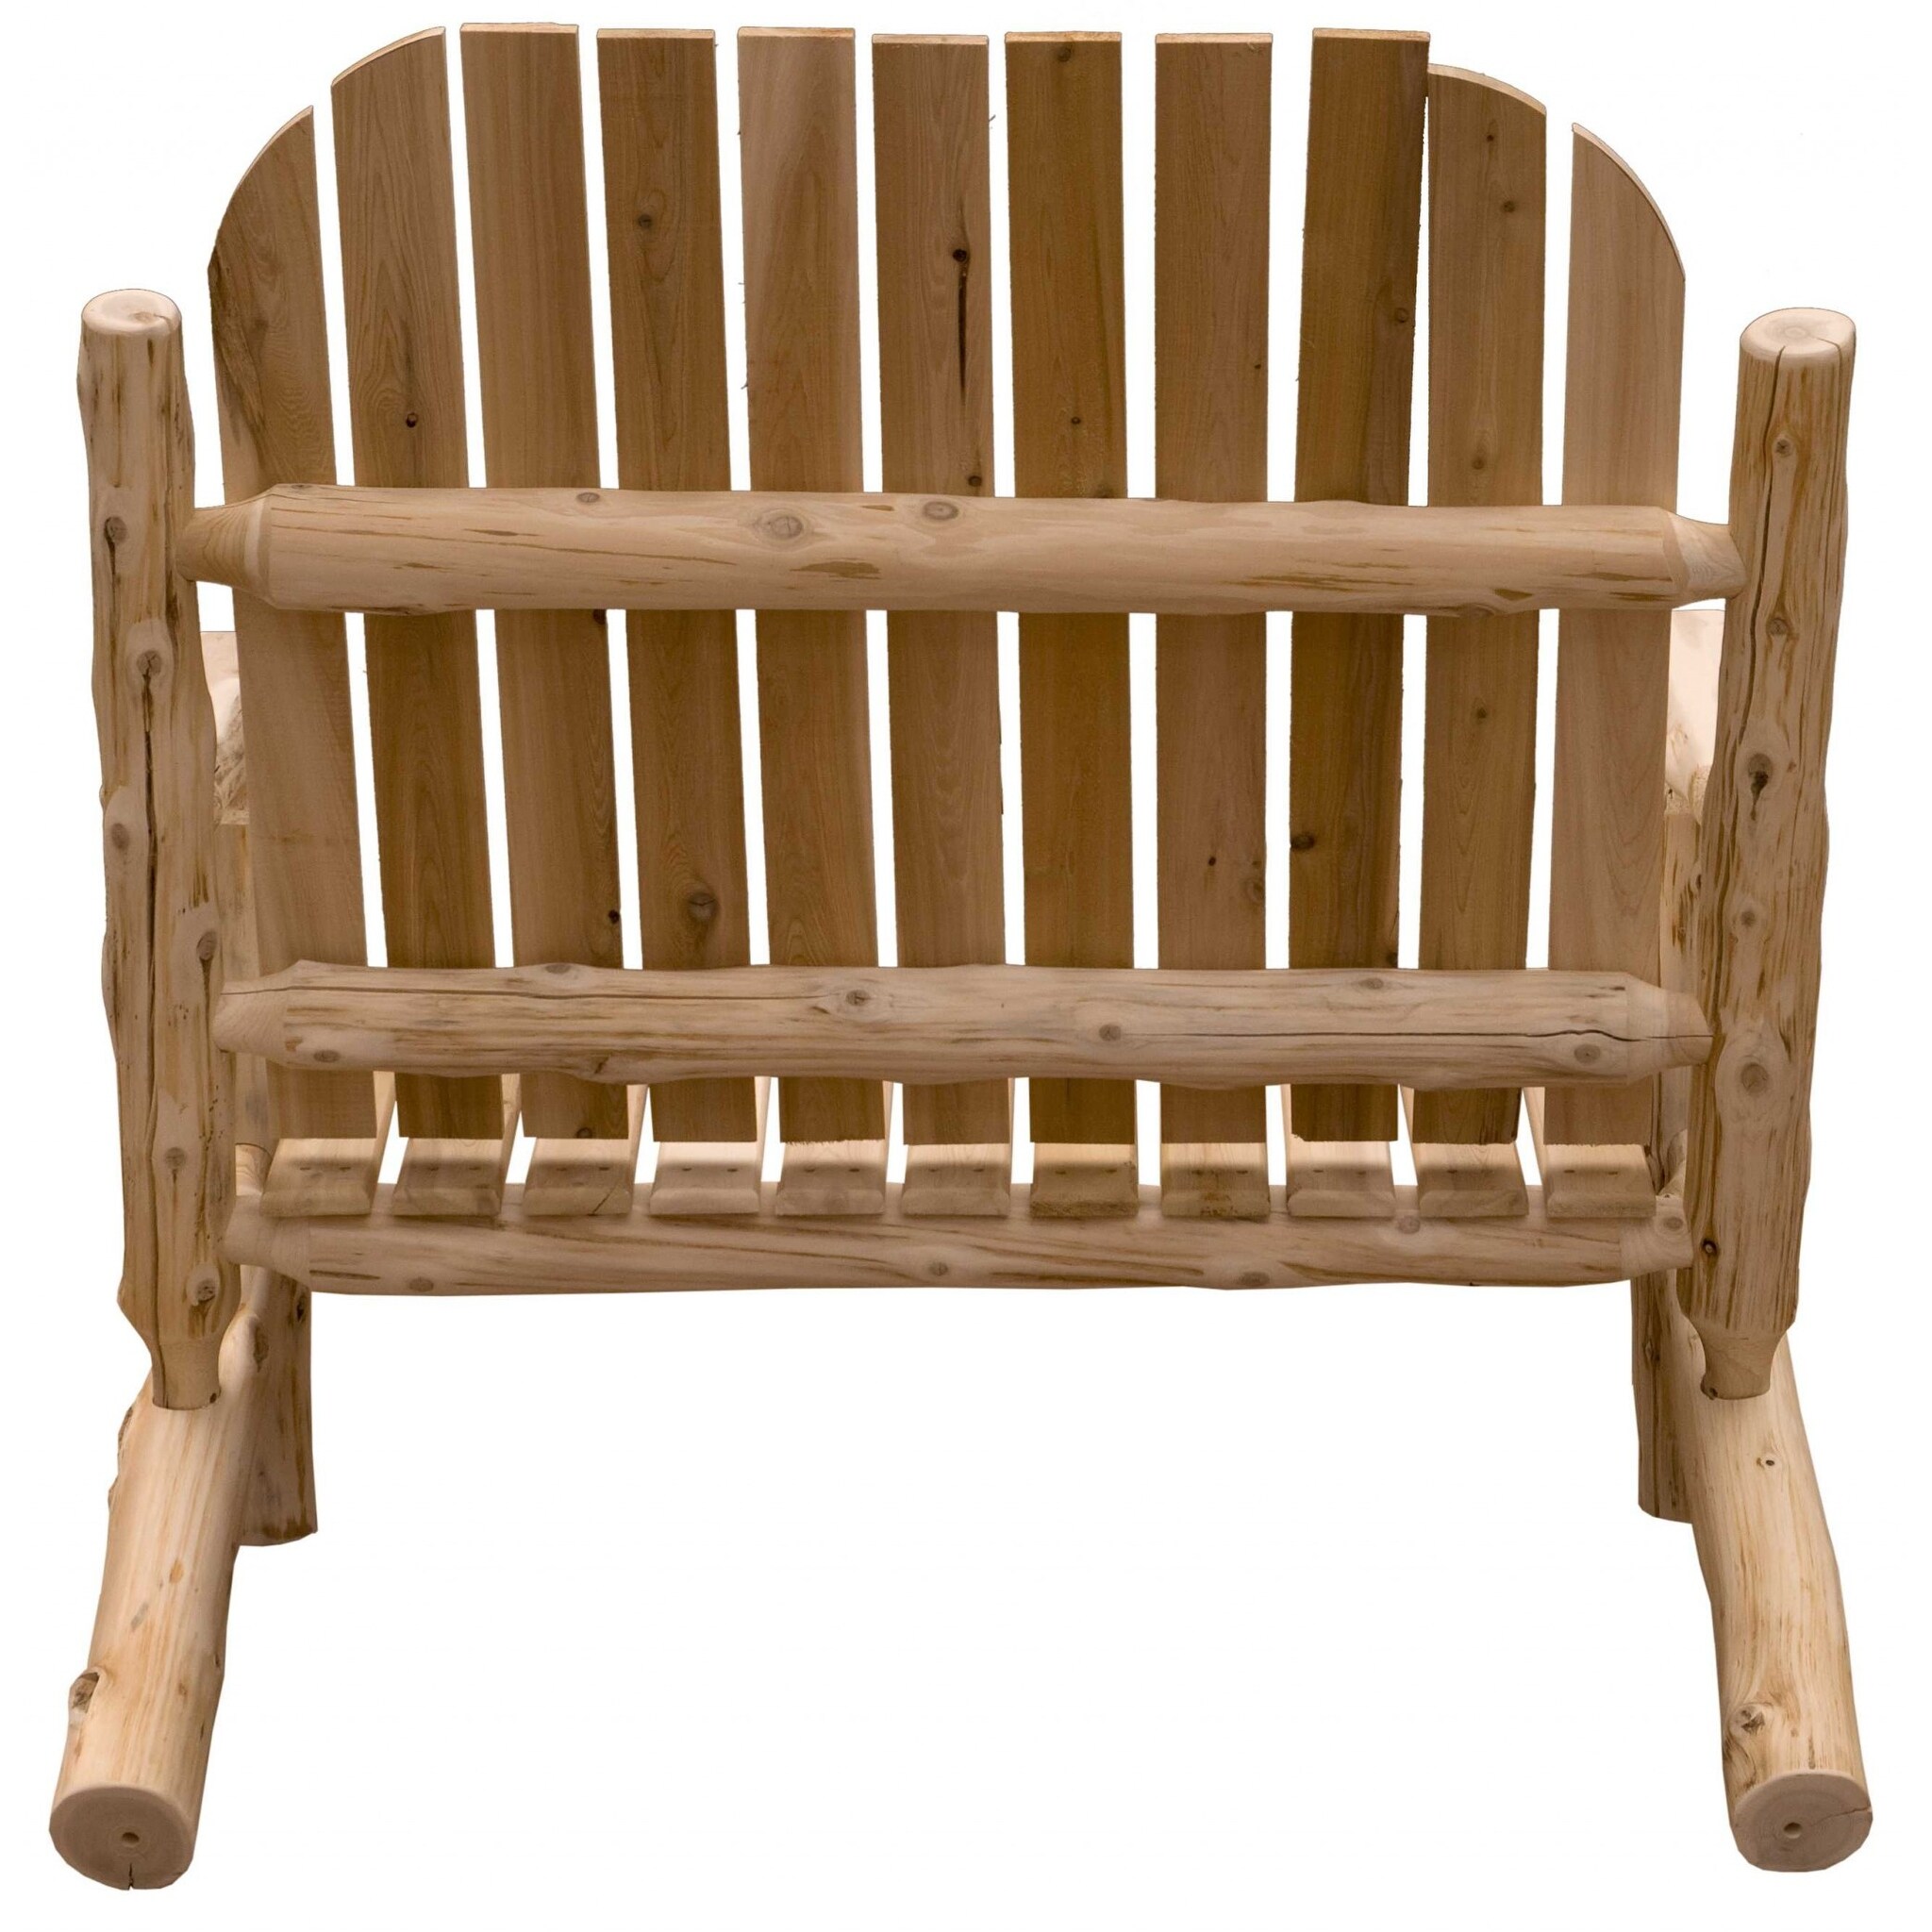 Rustic and Natural Cedar Two - Person Adirondack Chair - 48" W x 36" D x 48" H